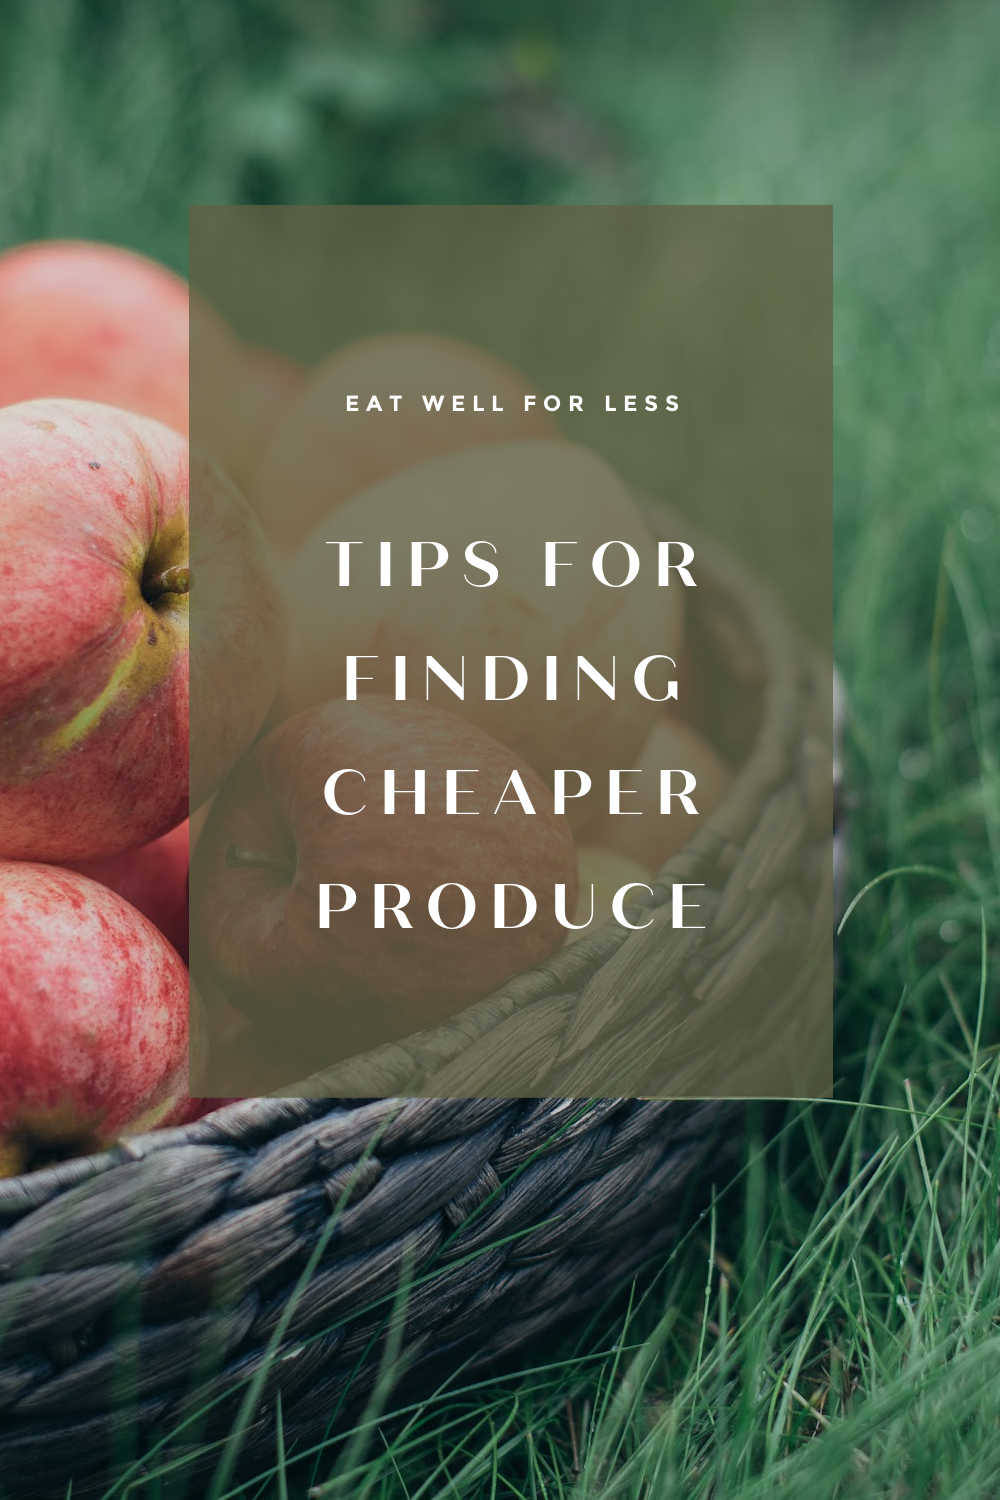 FINDING CHEAPER PRODUCE